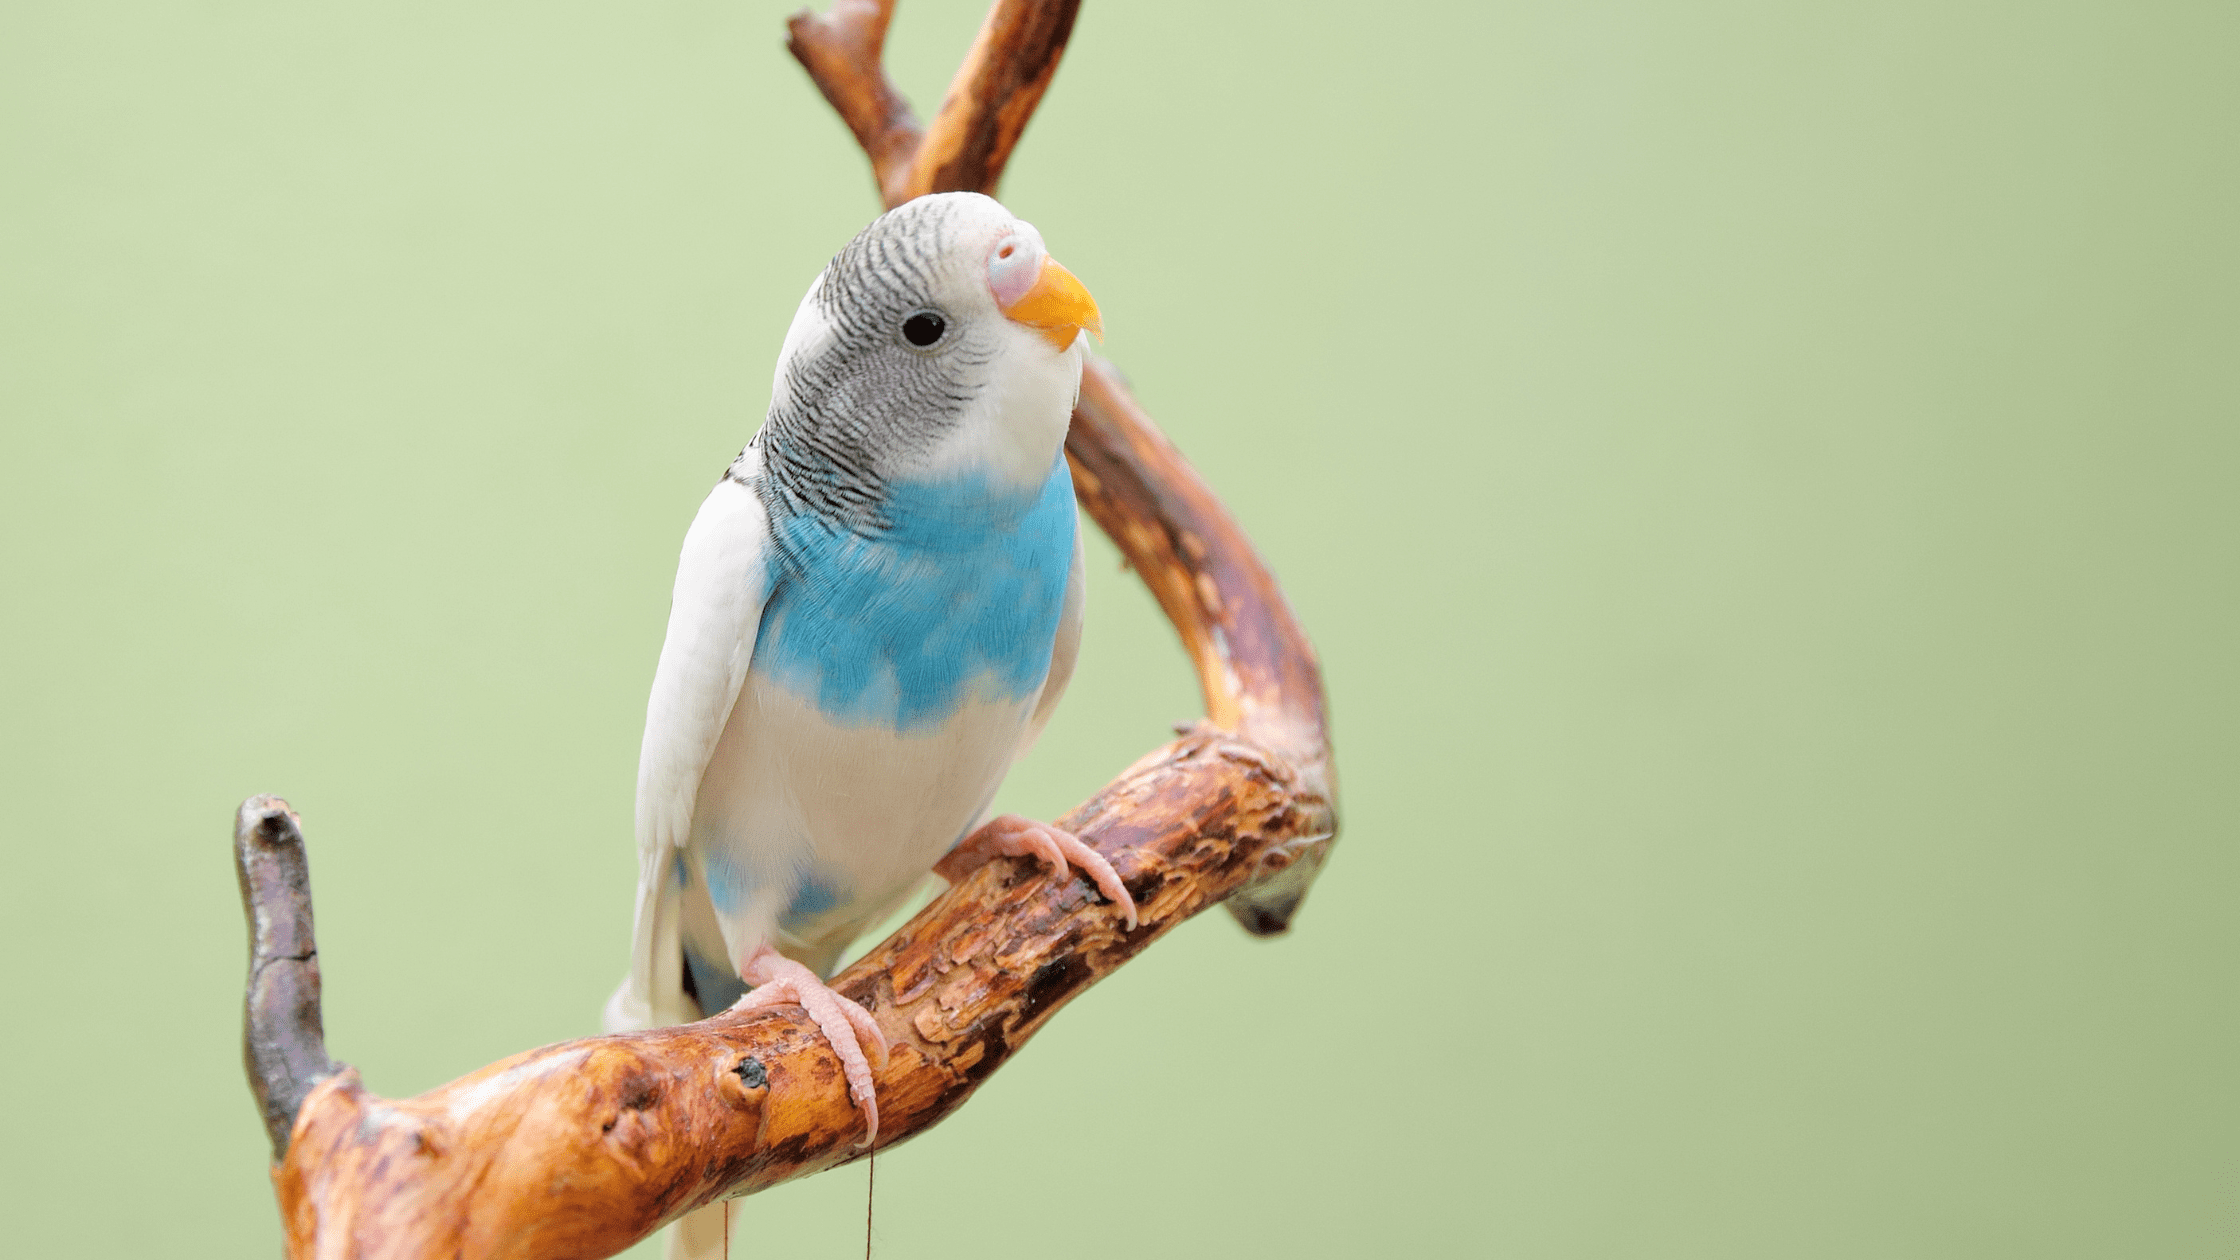 How to Make My Lonely Budgie Feel Better?